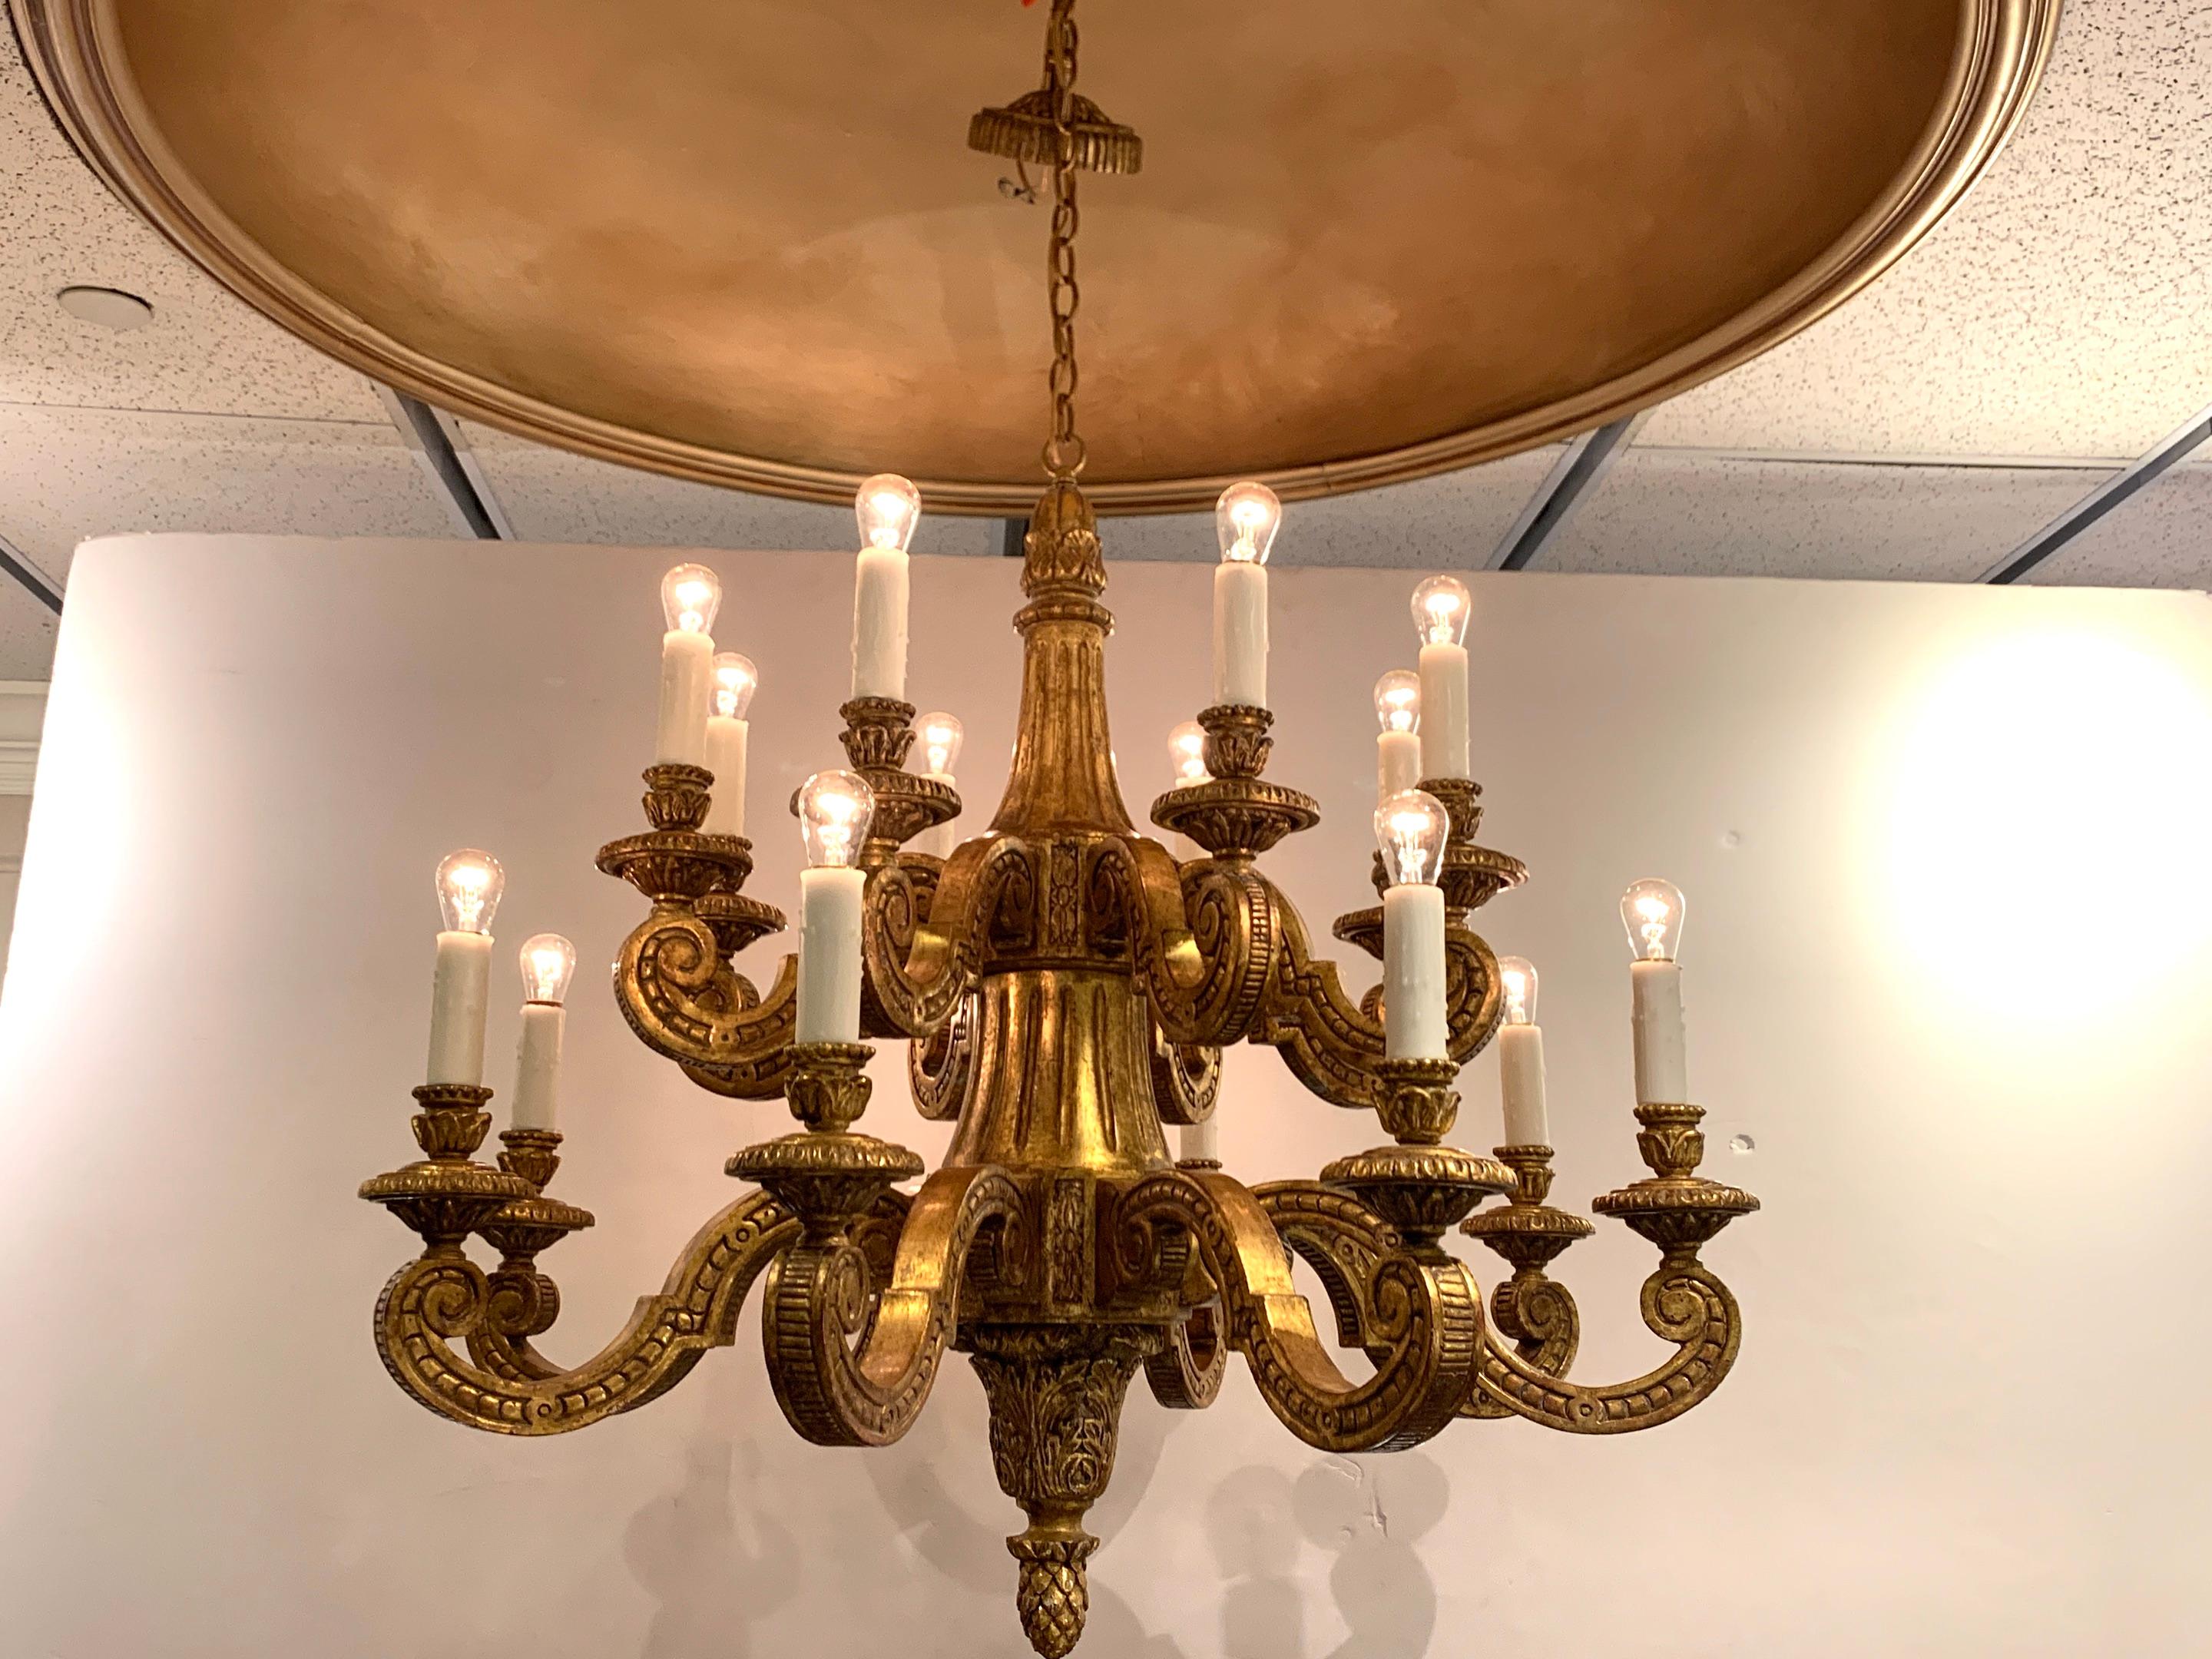 20th Century Regence Style Carved Giltwood Chandelier, 18 Lights For Sale